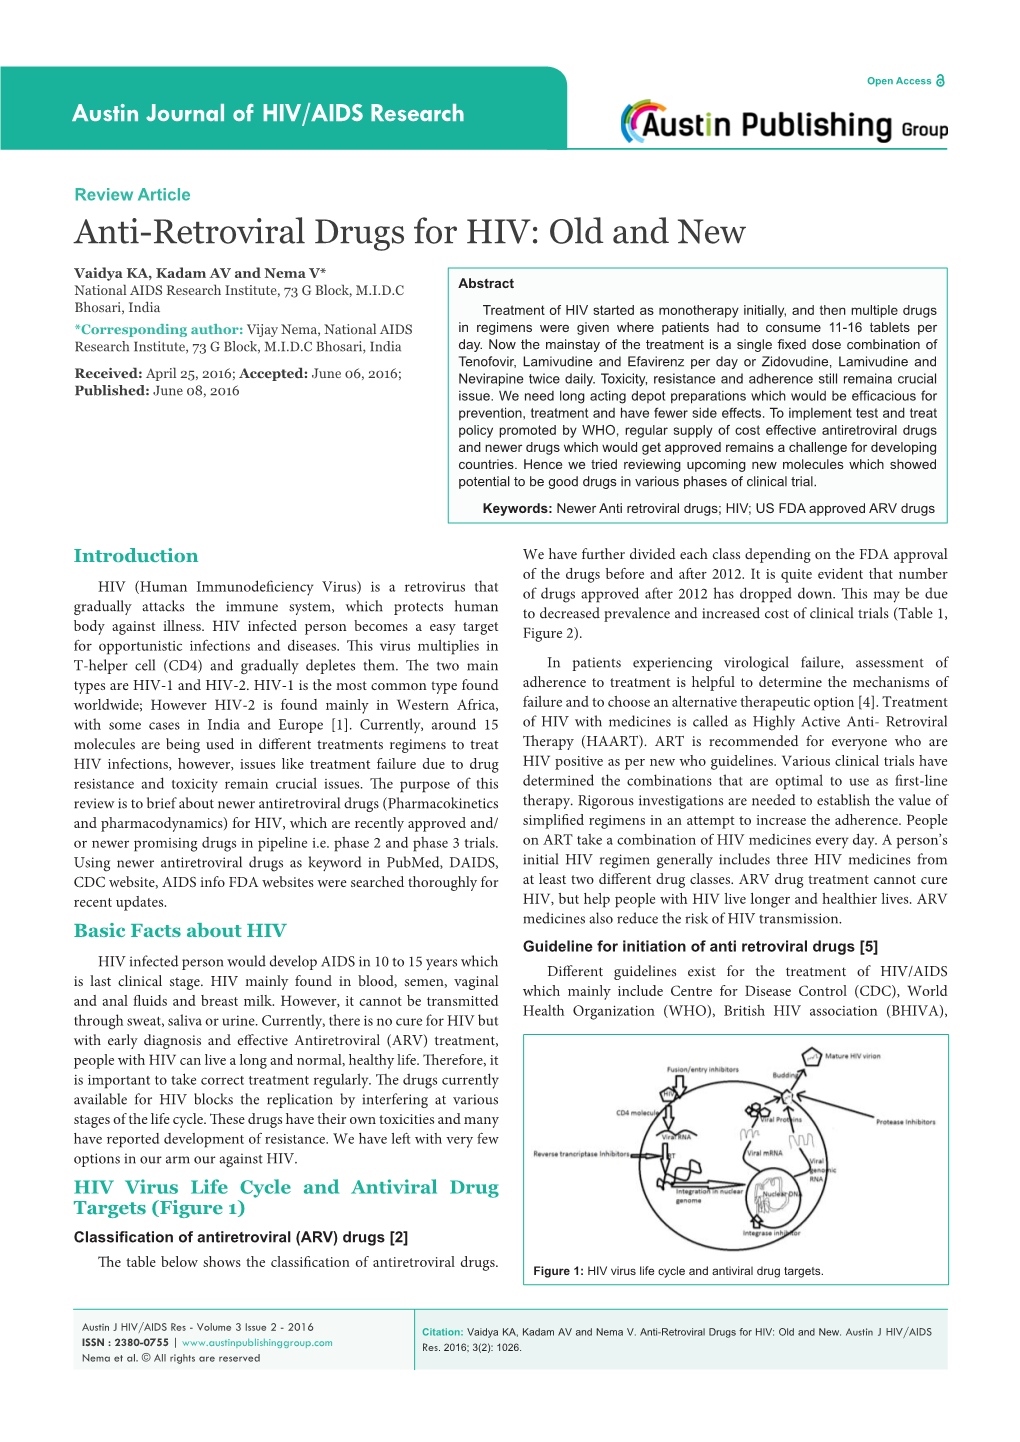 Anti-Retroviral Drugs for HIV: Old and New